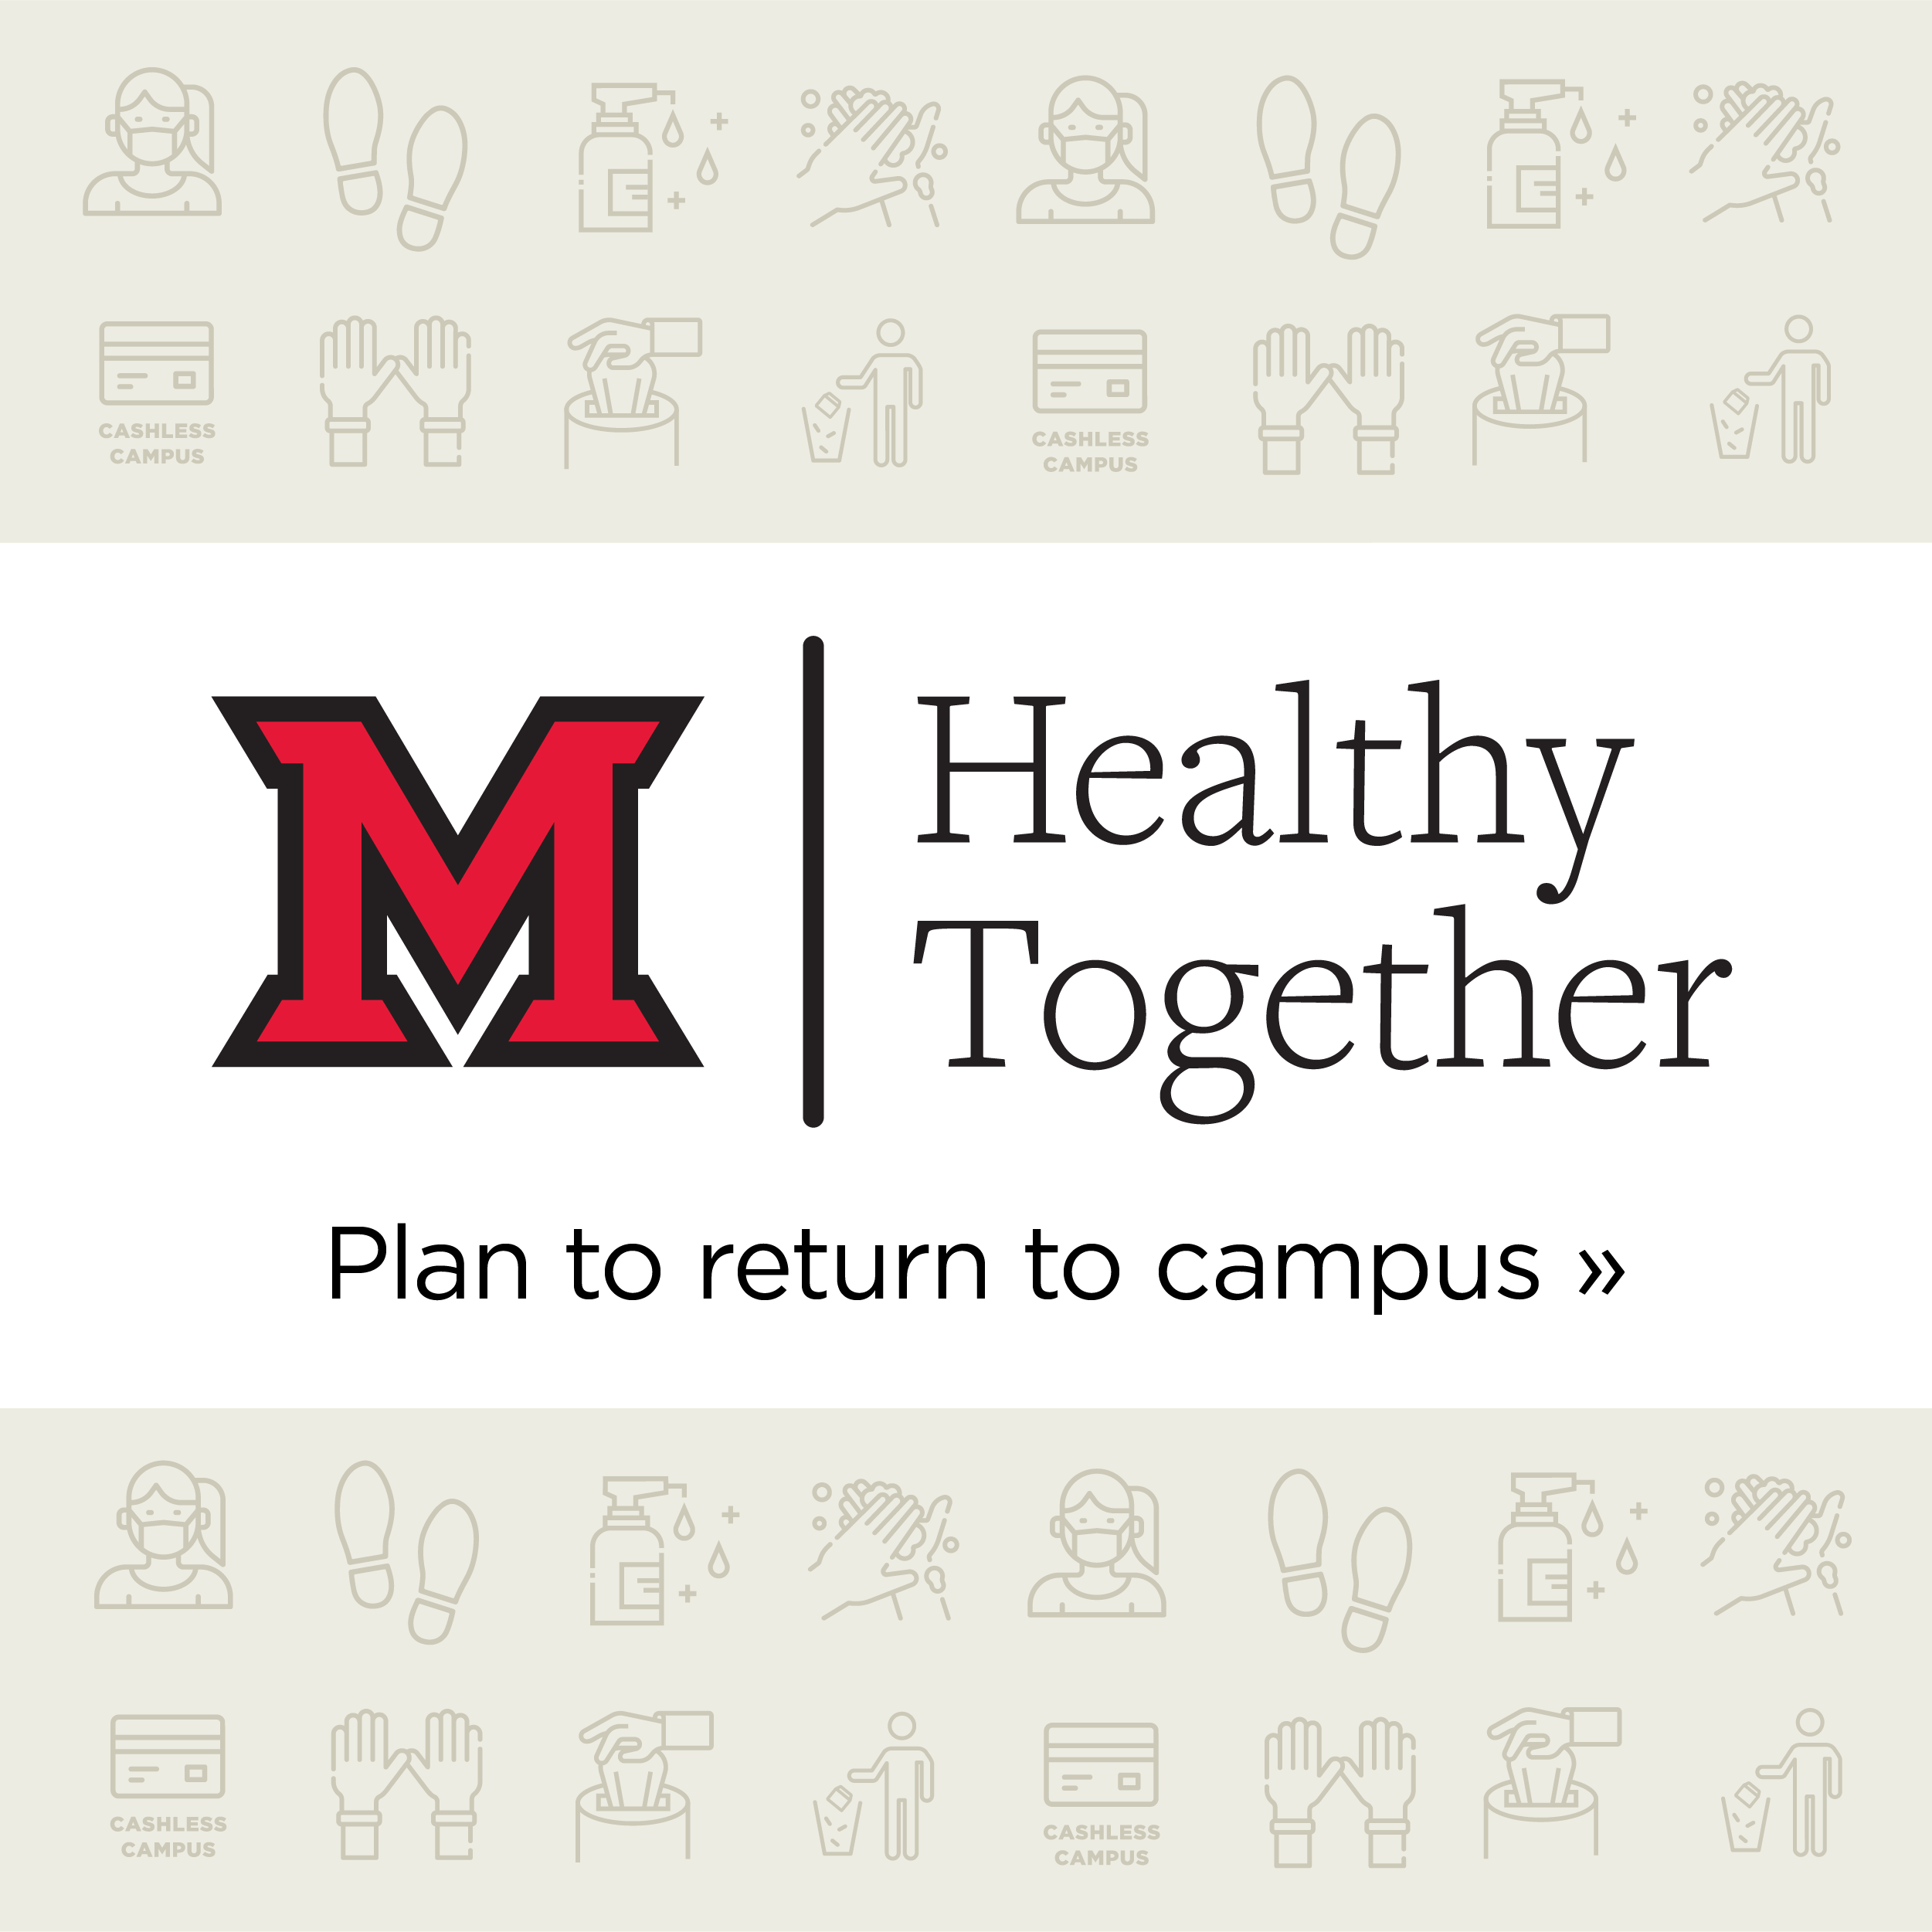 Health Together. Plan to return to campus.